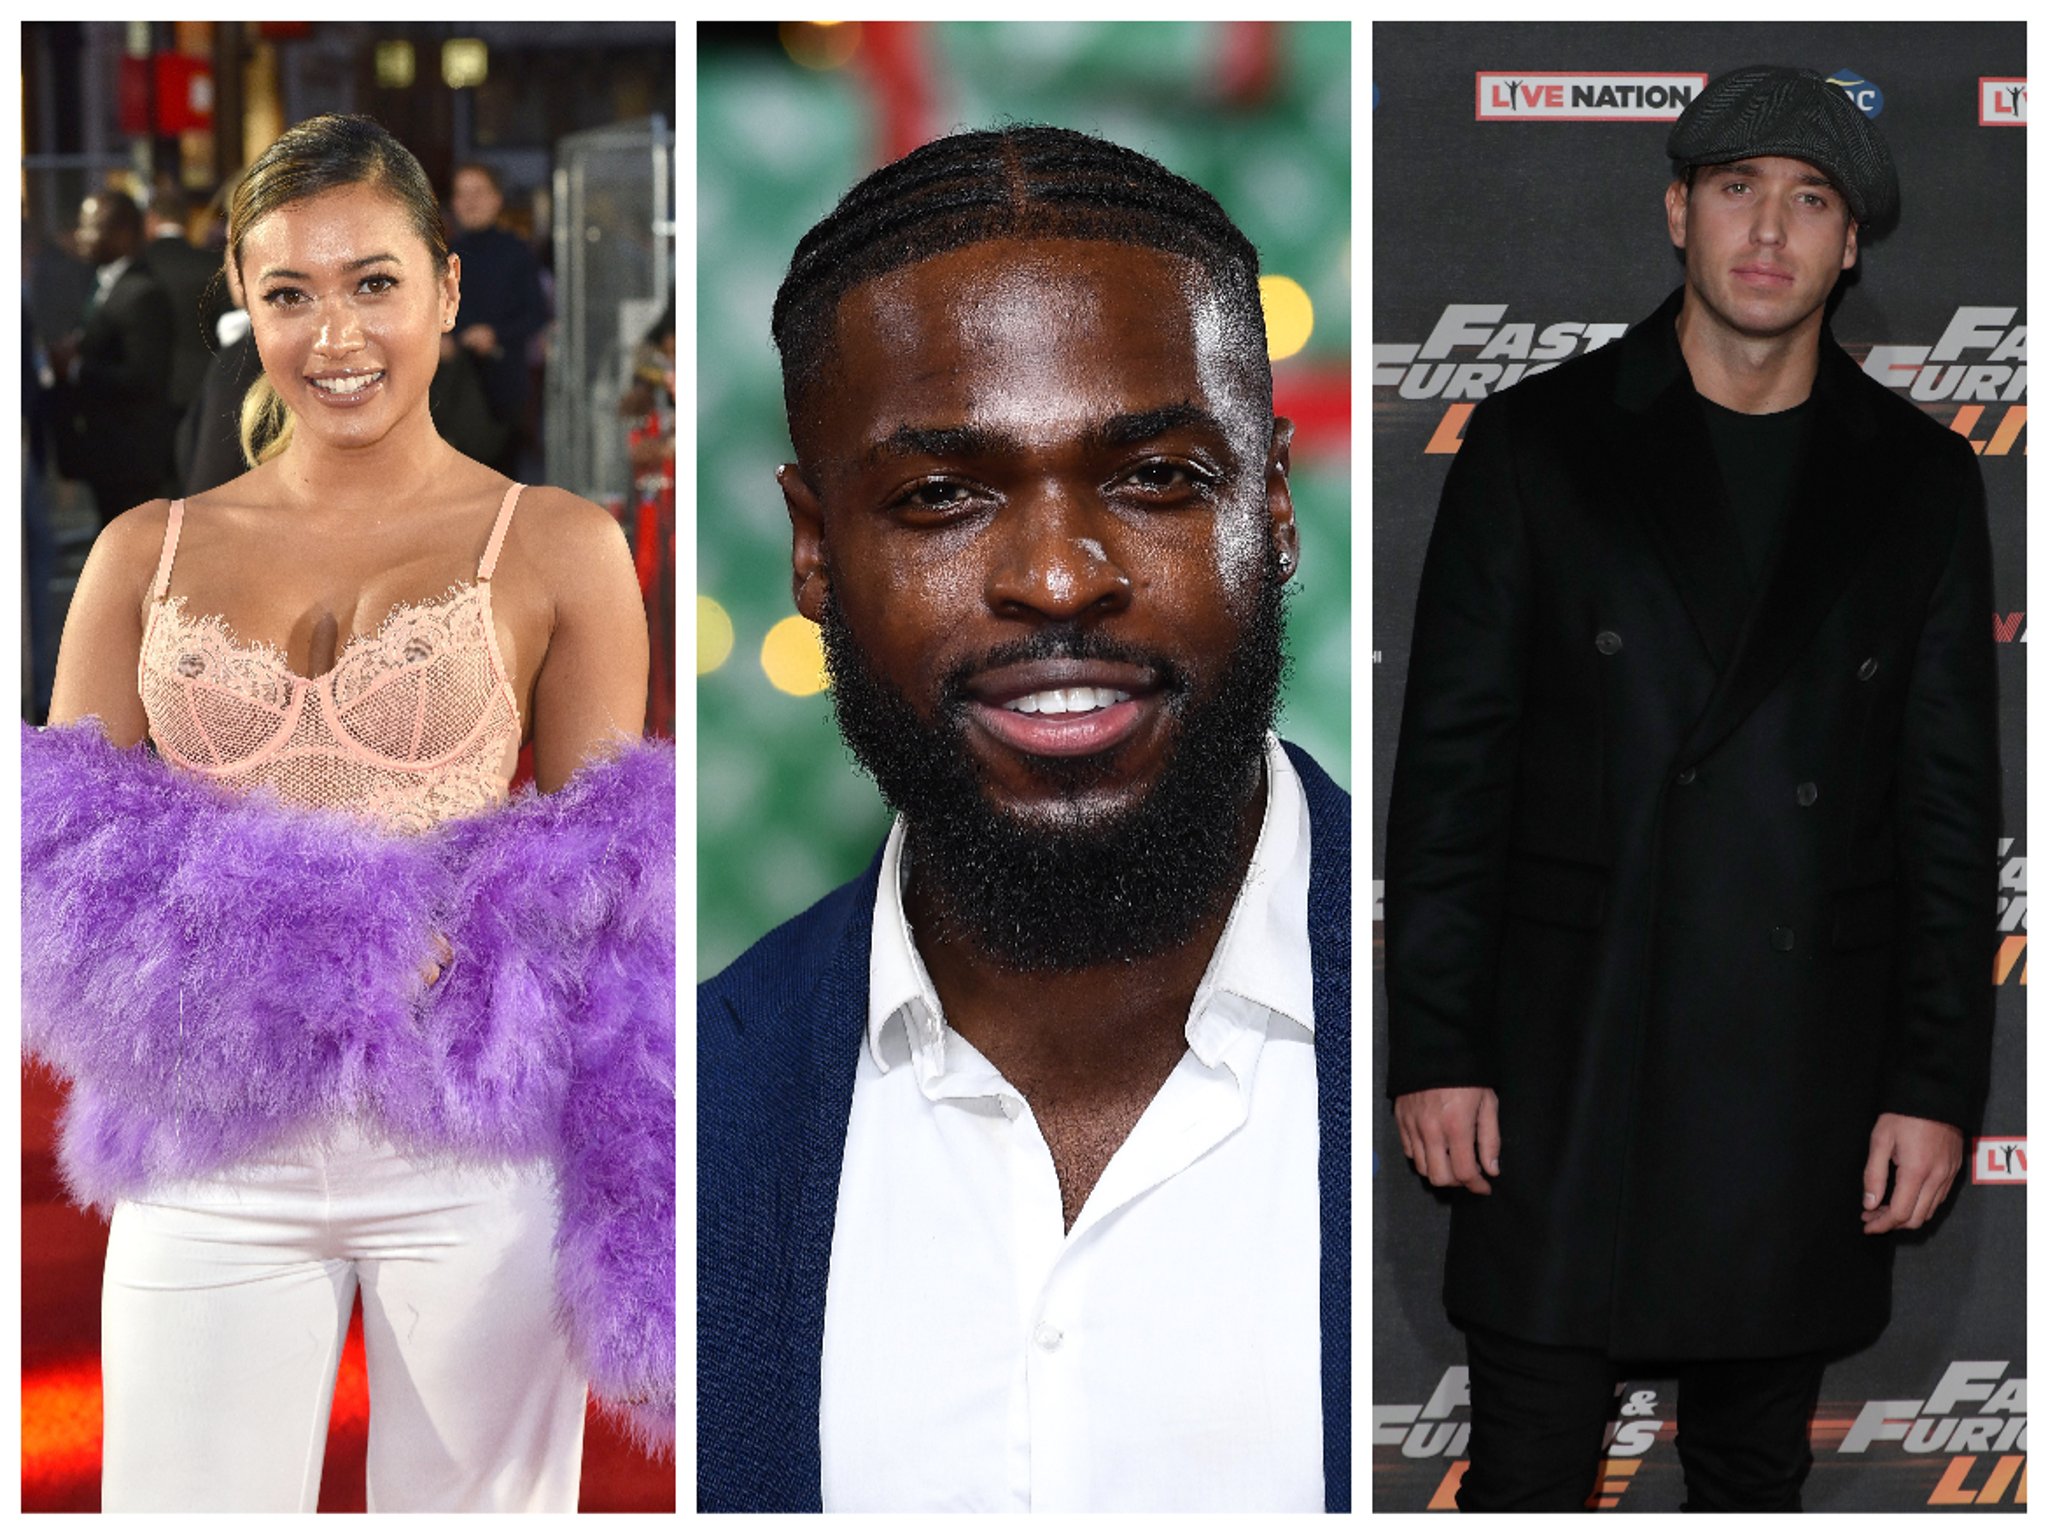 Celebrity Ex On The Beach 22 Cast With Ex Love Island And Towie Stars And Where Mtv Show Is Being Filmed Nationalworld